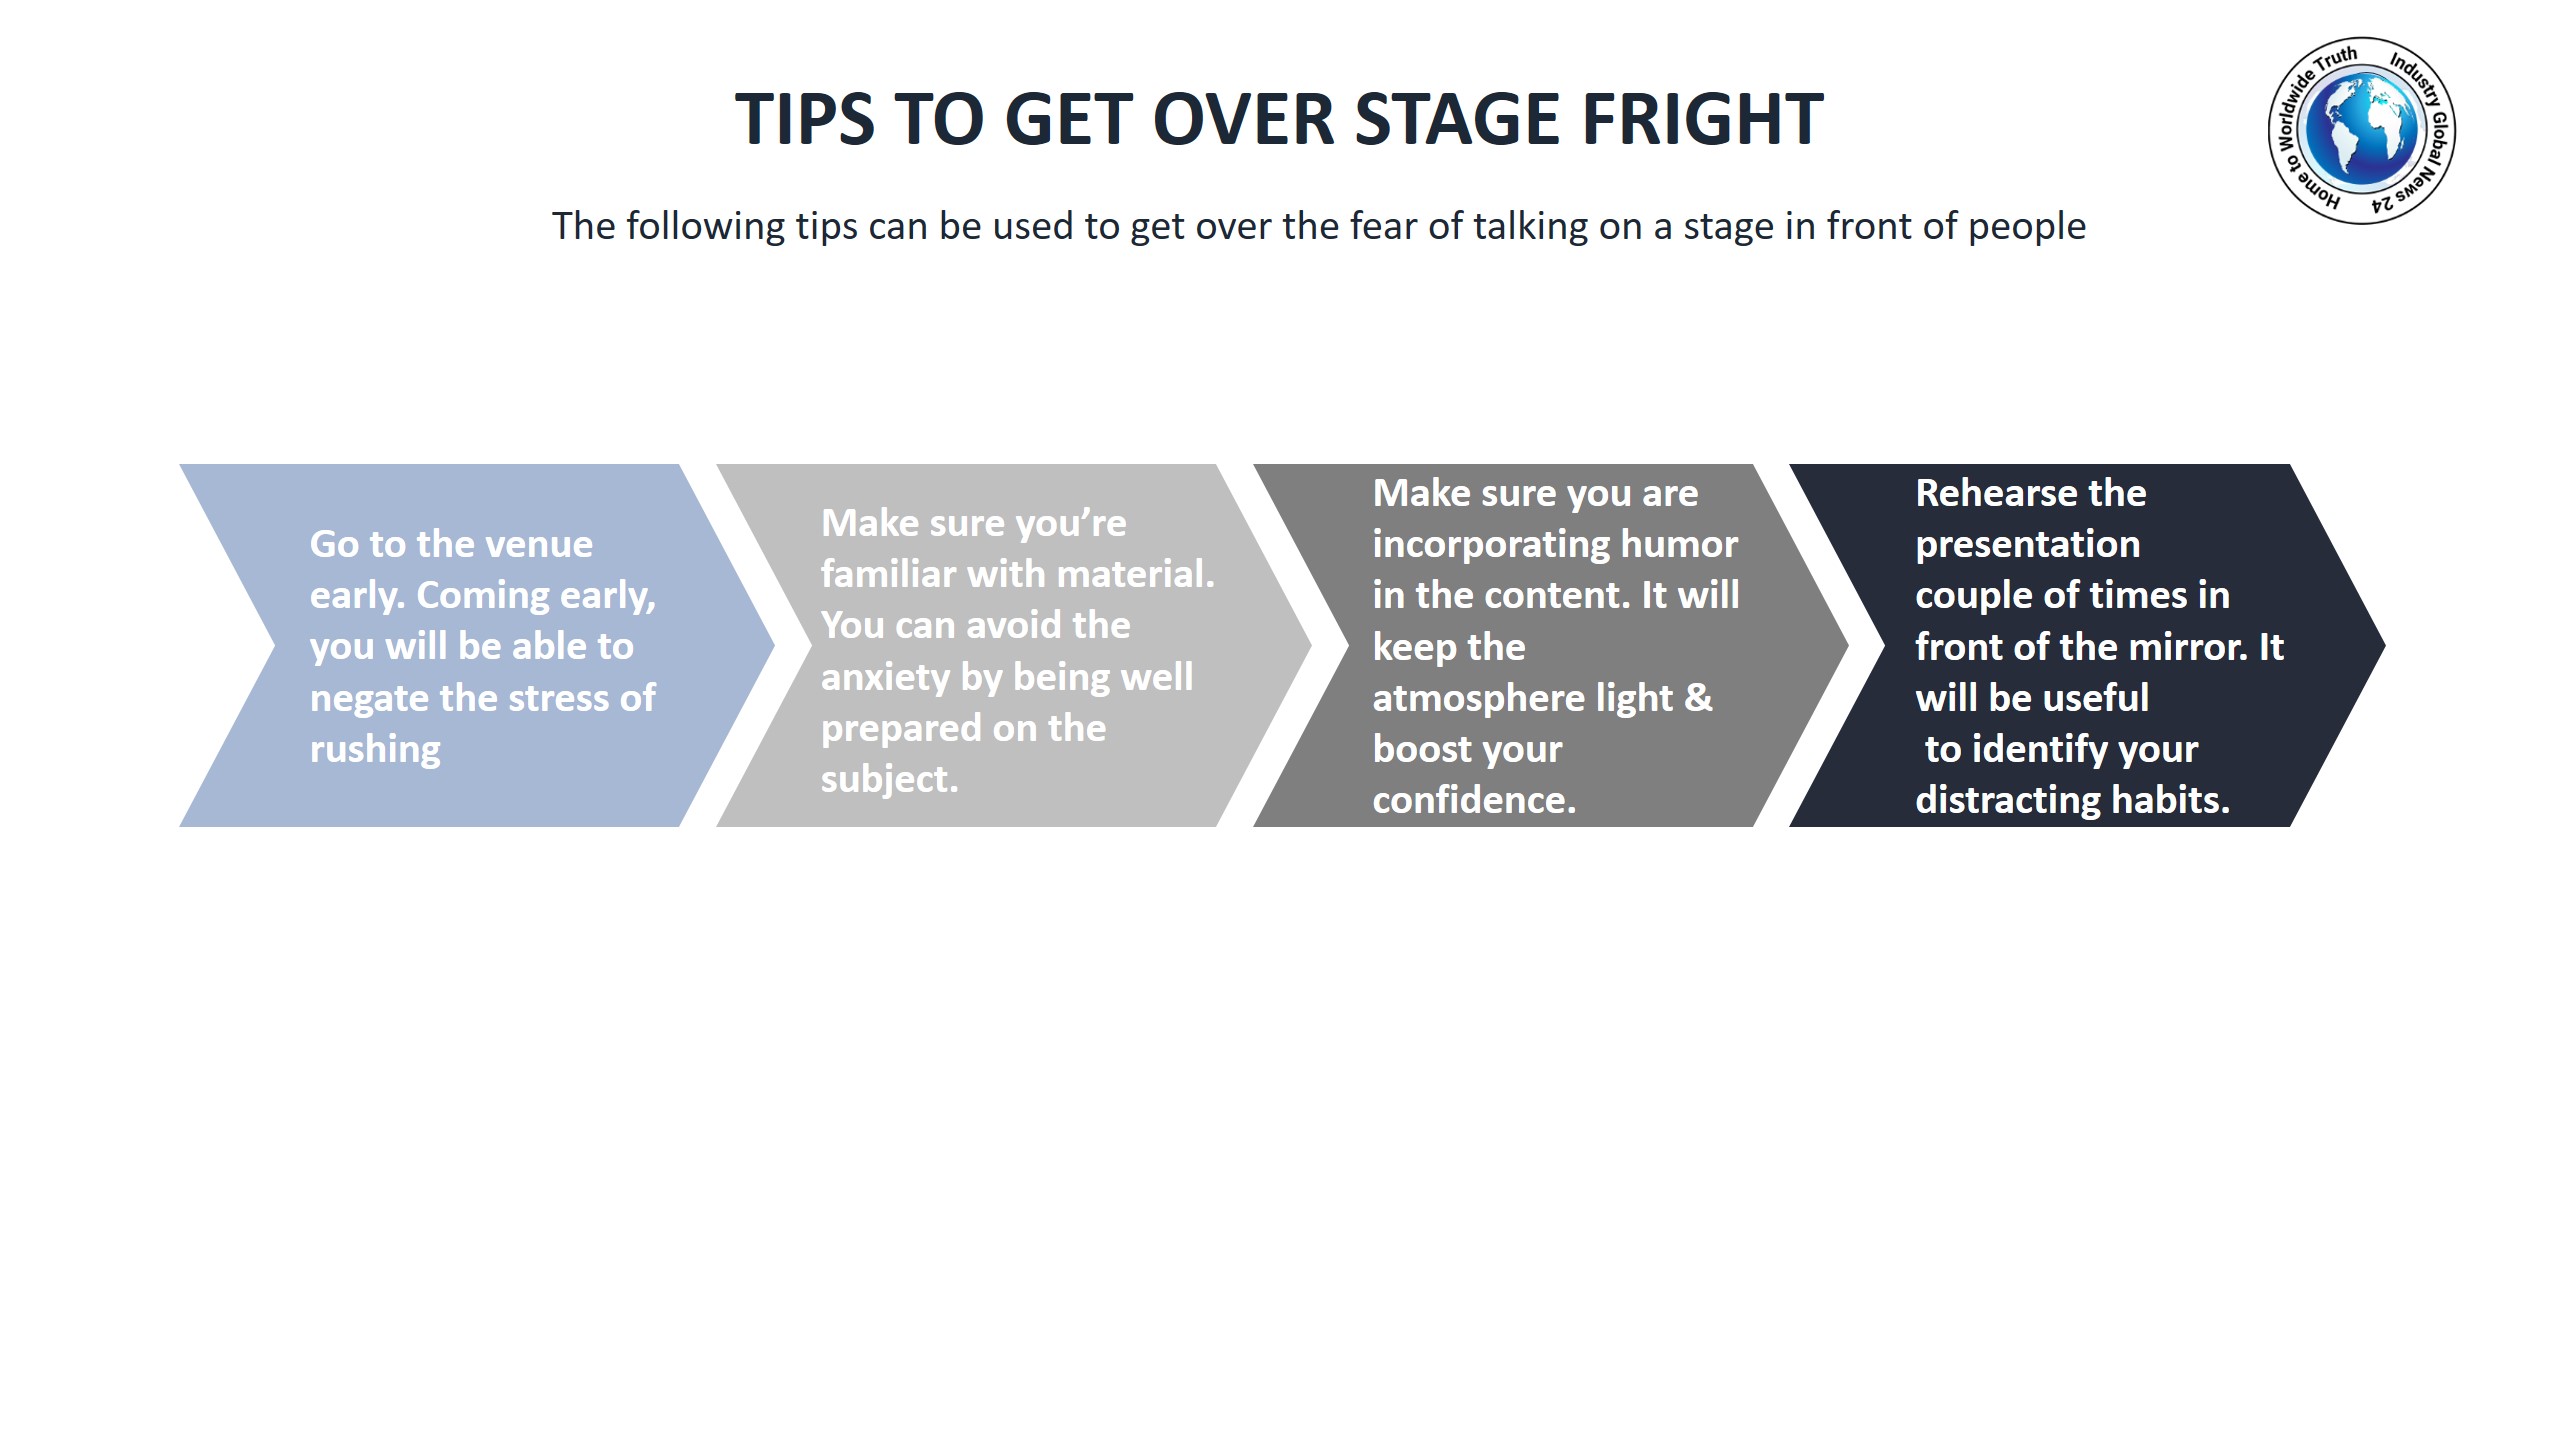 Tips to get over stage fright